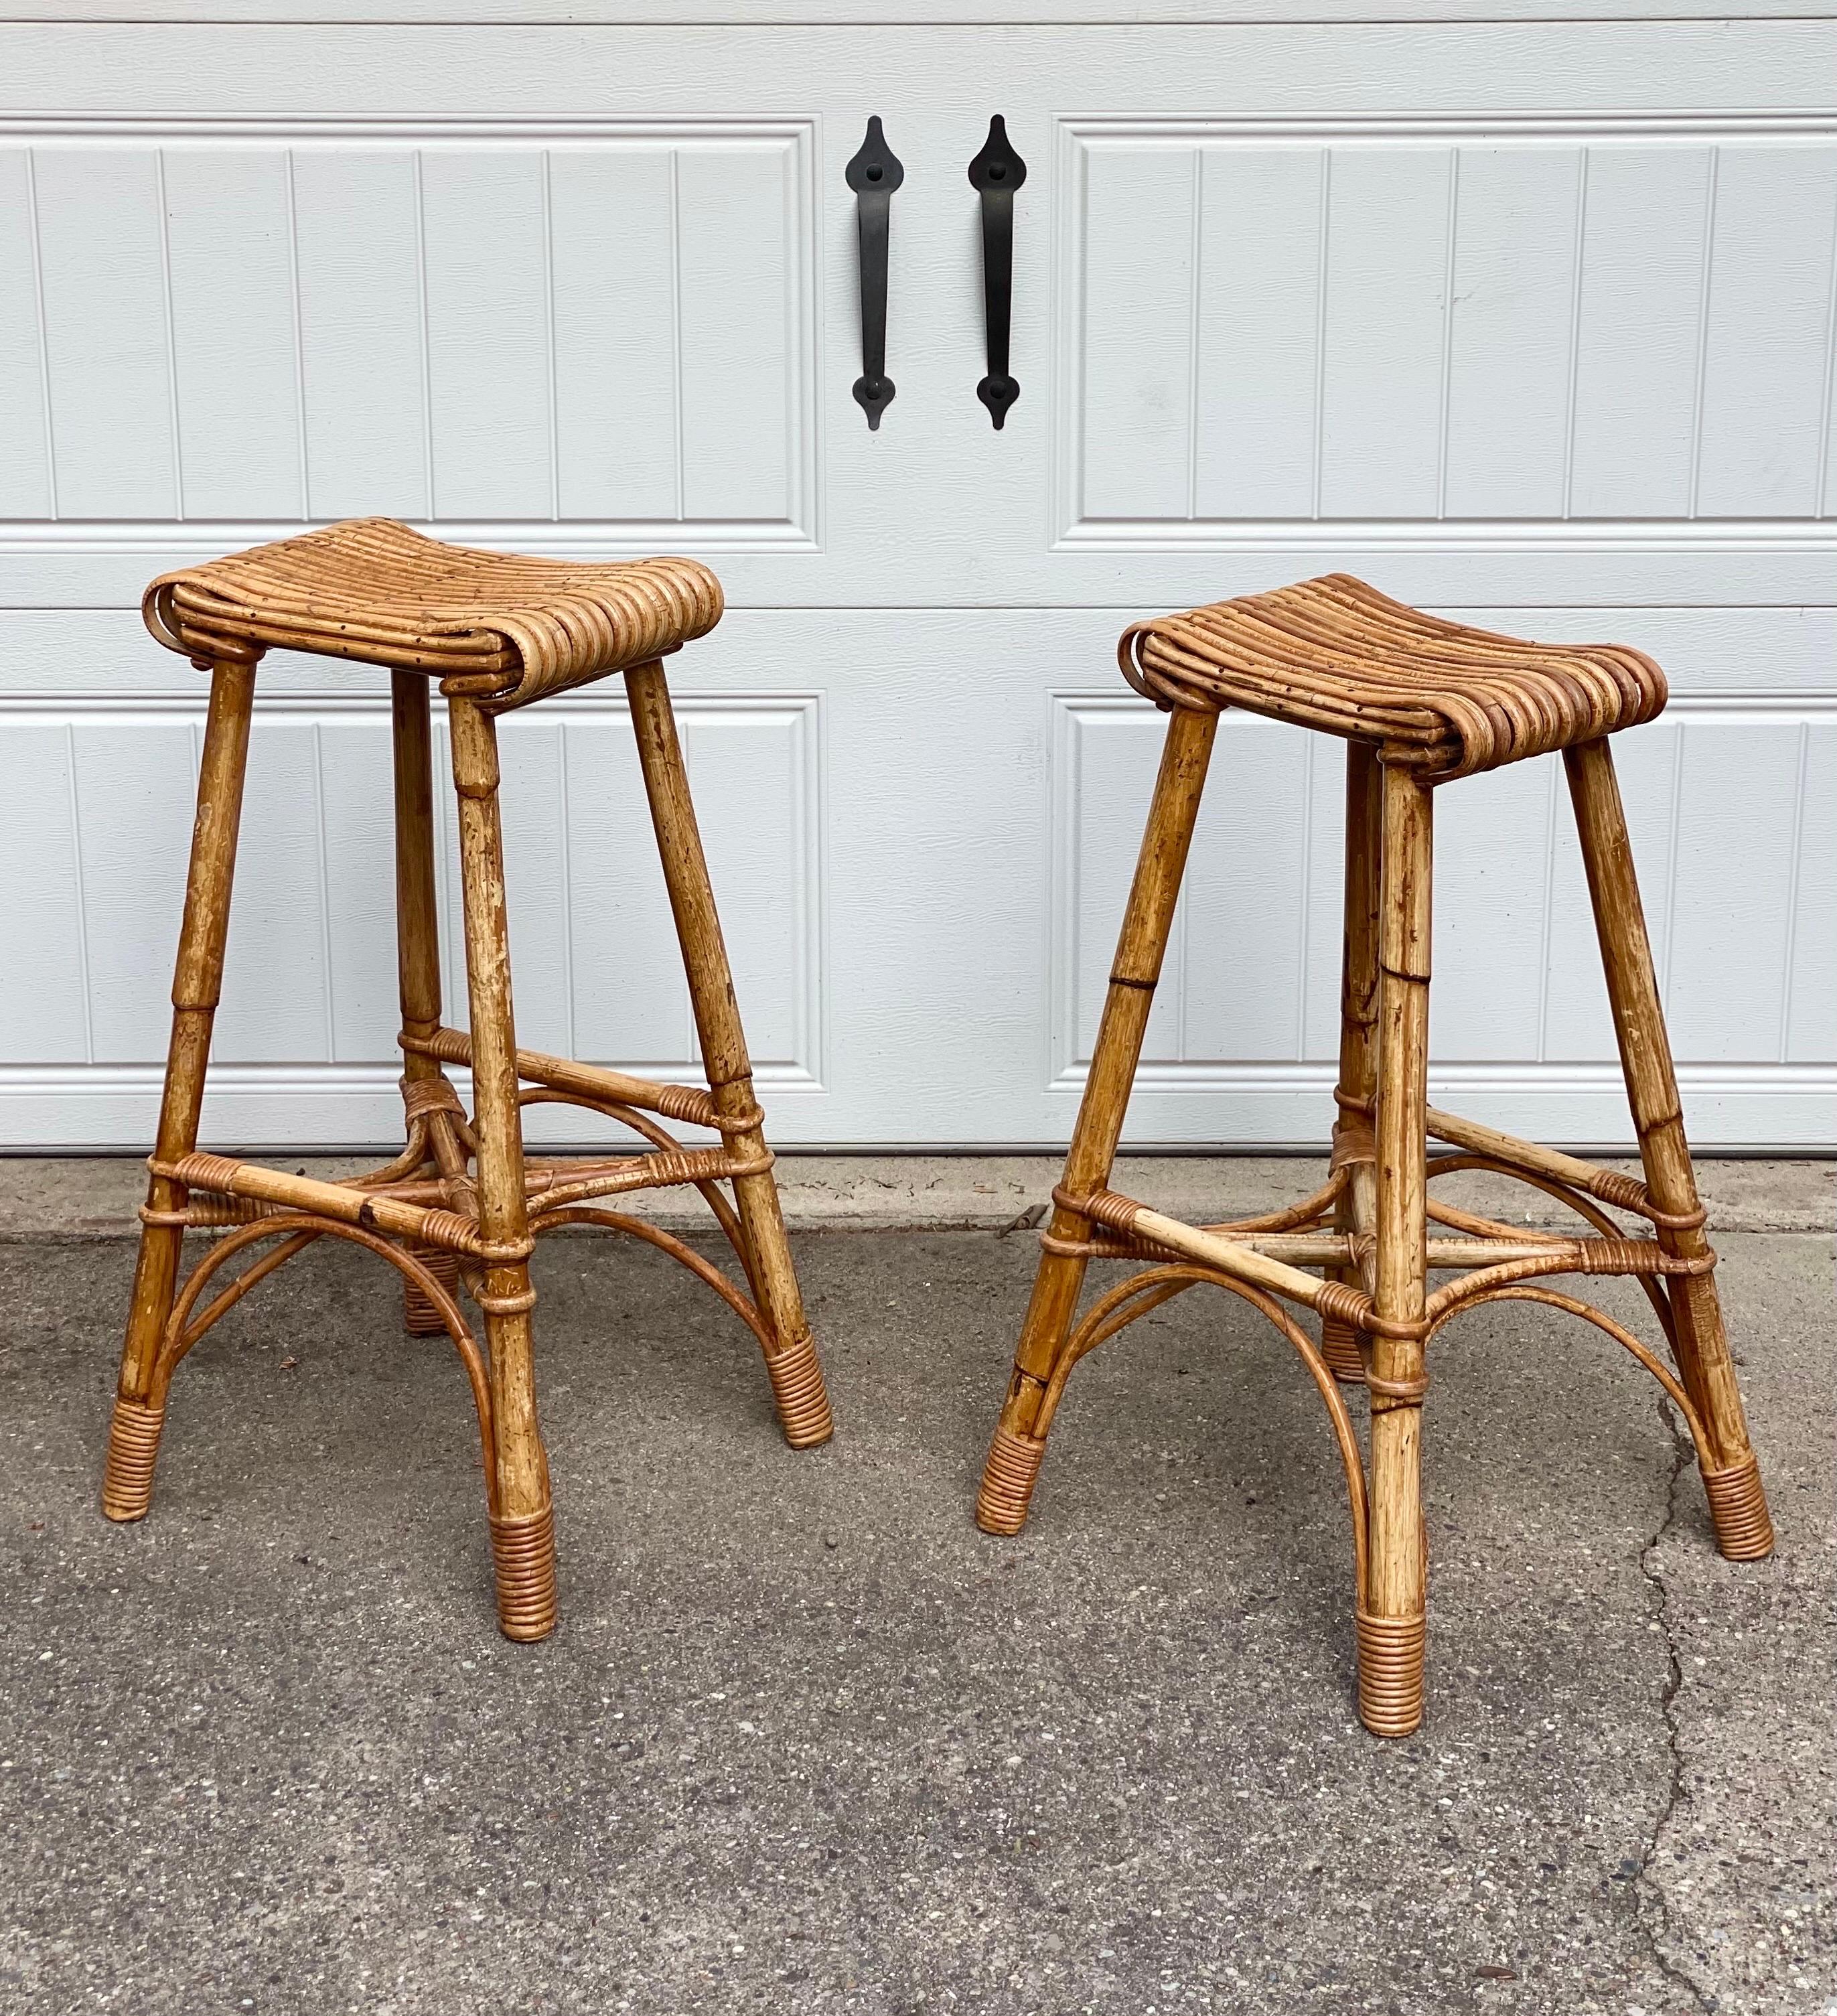 We are very pleased to offer a pair of vintage bar stools by British Company J. Birdekin, circa the 1940s. Handcrafted in Ossett, a market town in West Yorkshire, England, this backless pair showcases the timeless beauty of bamboo, a versatile and